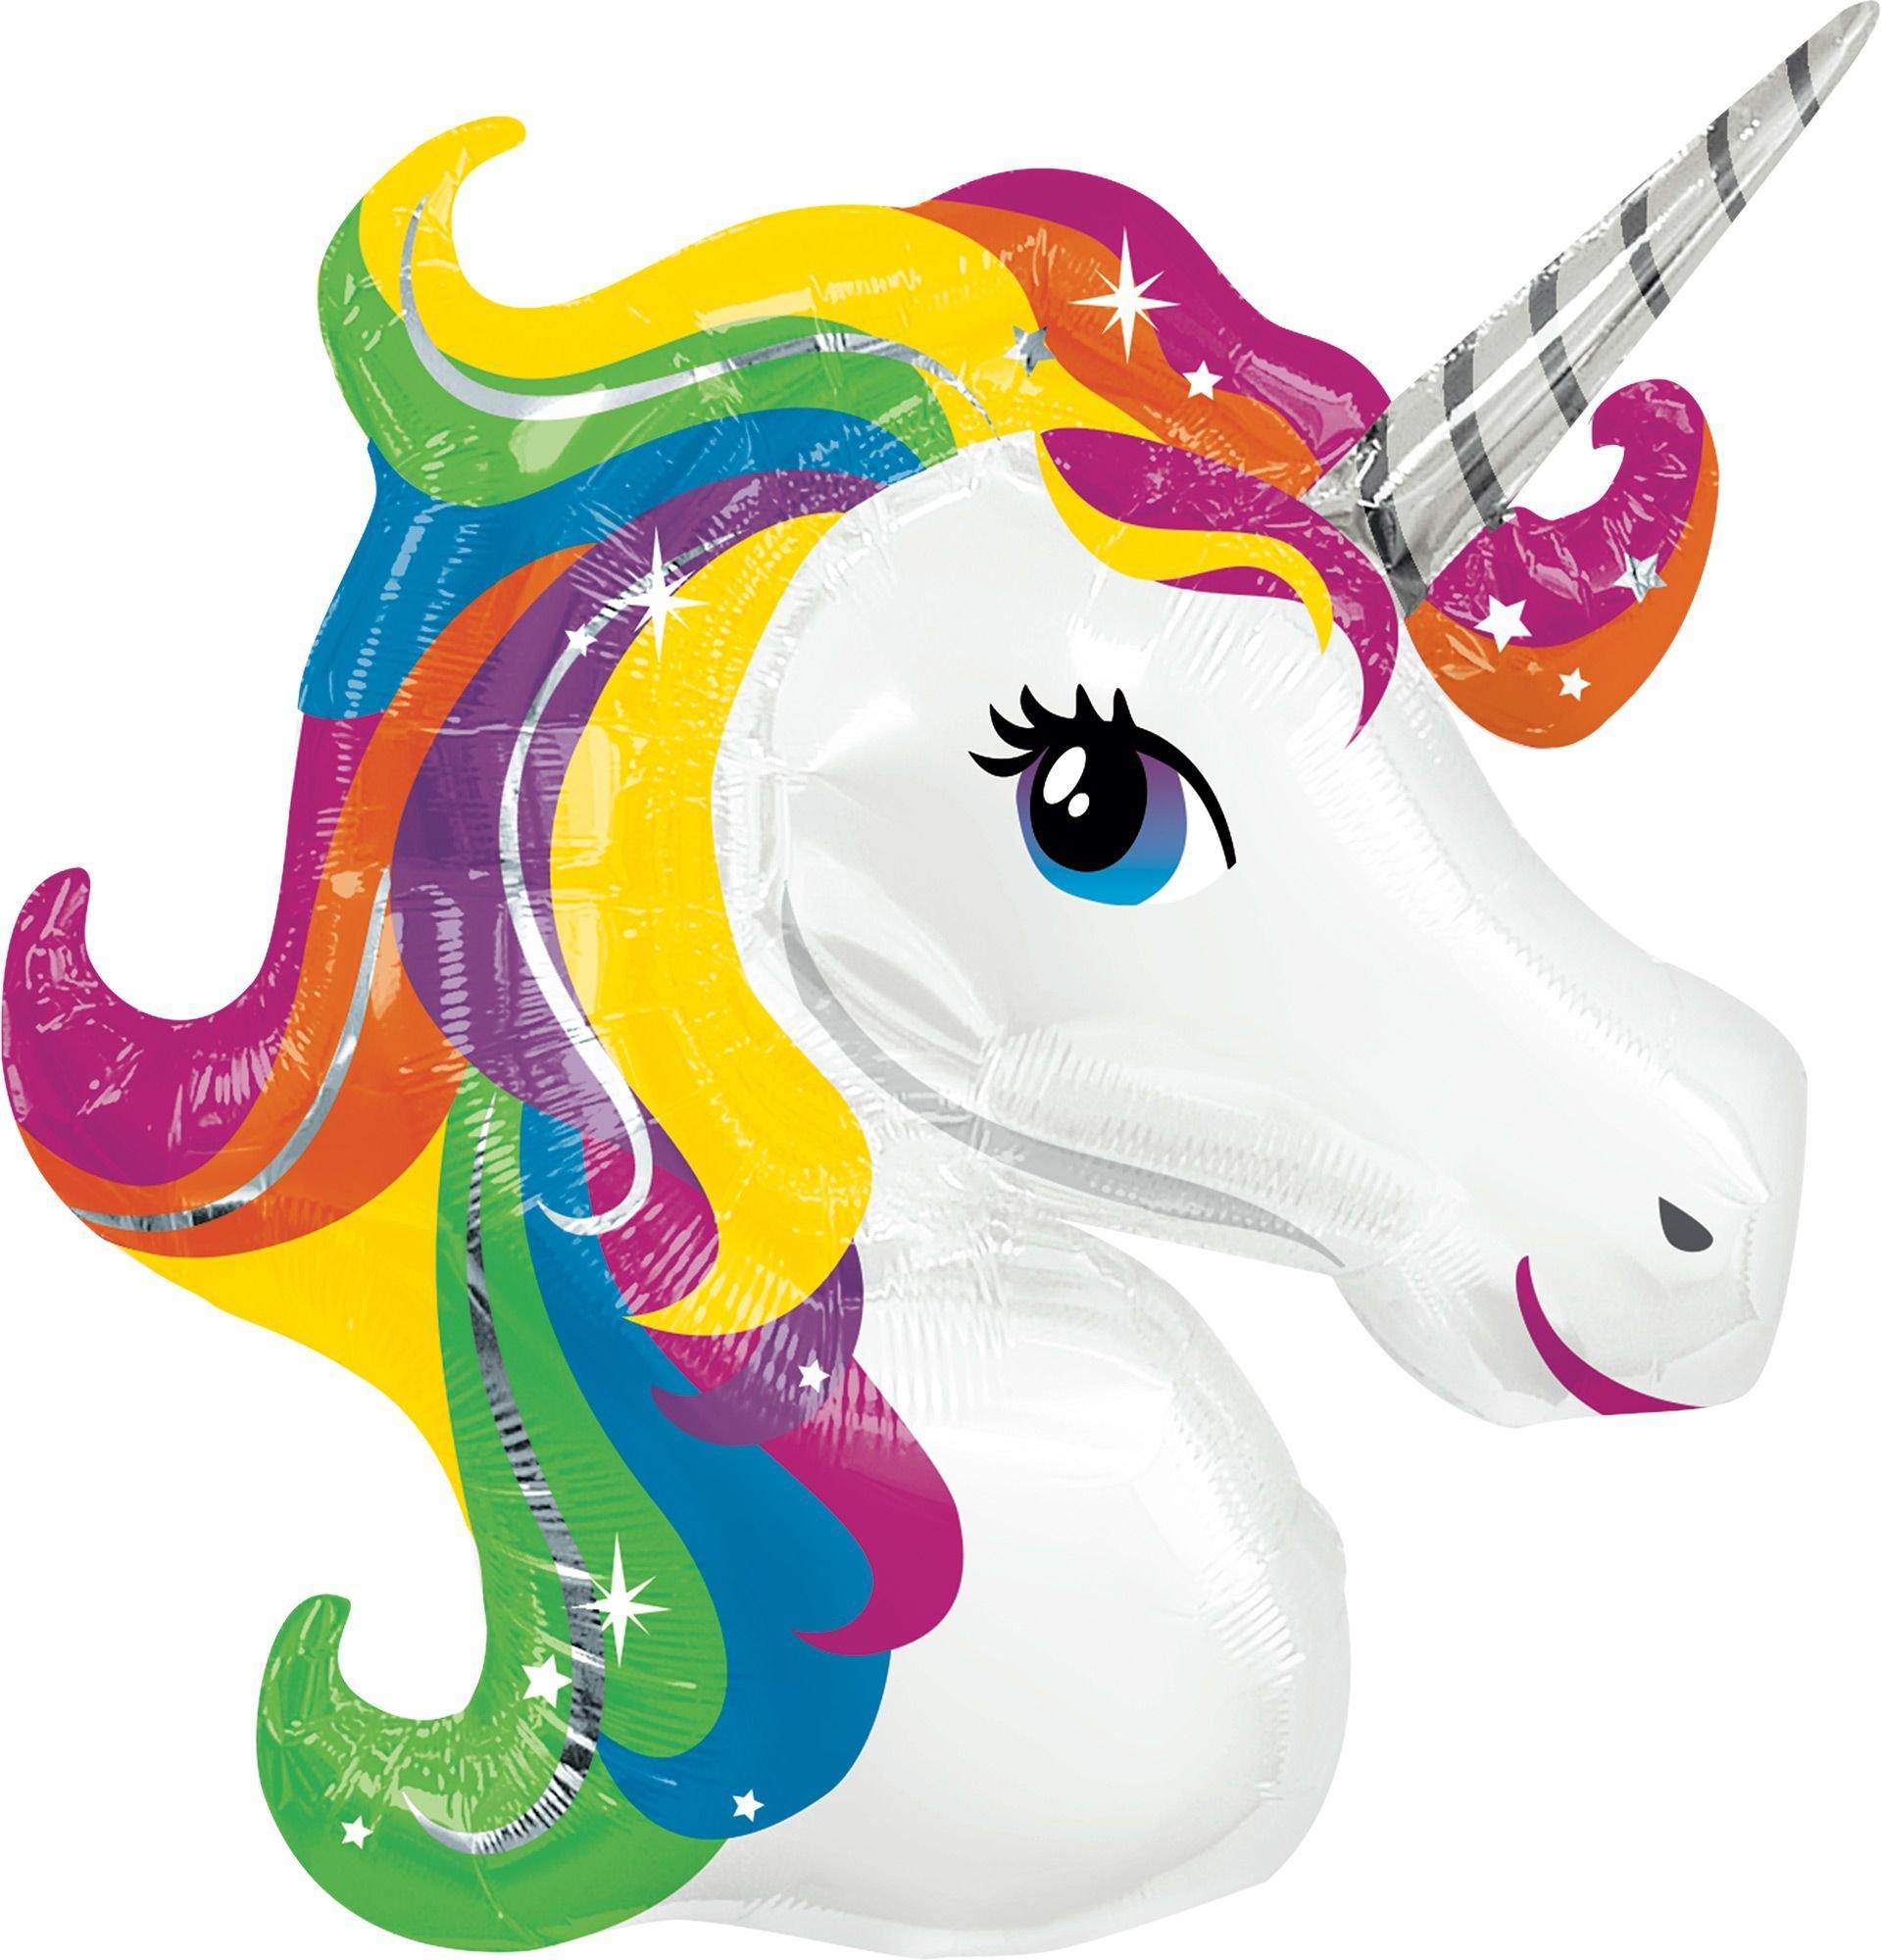 Unicorn and Rainbows Party Kit For 6th Birthday